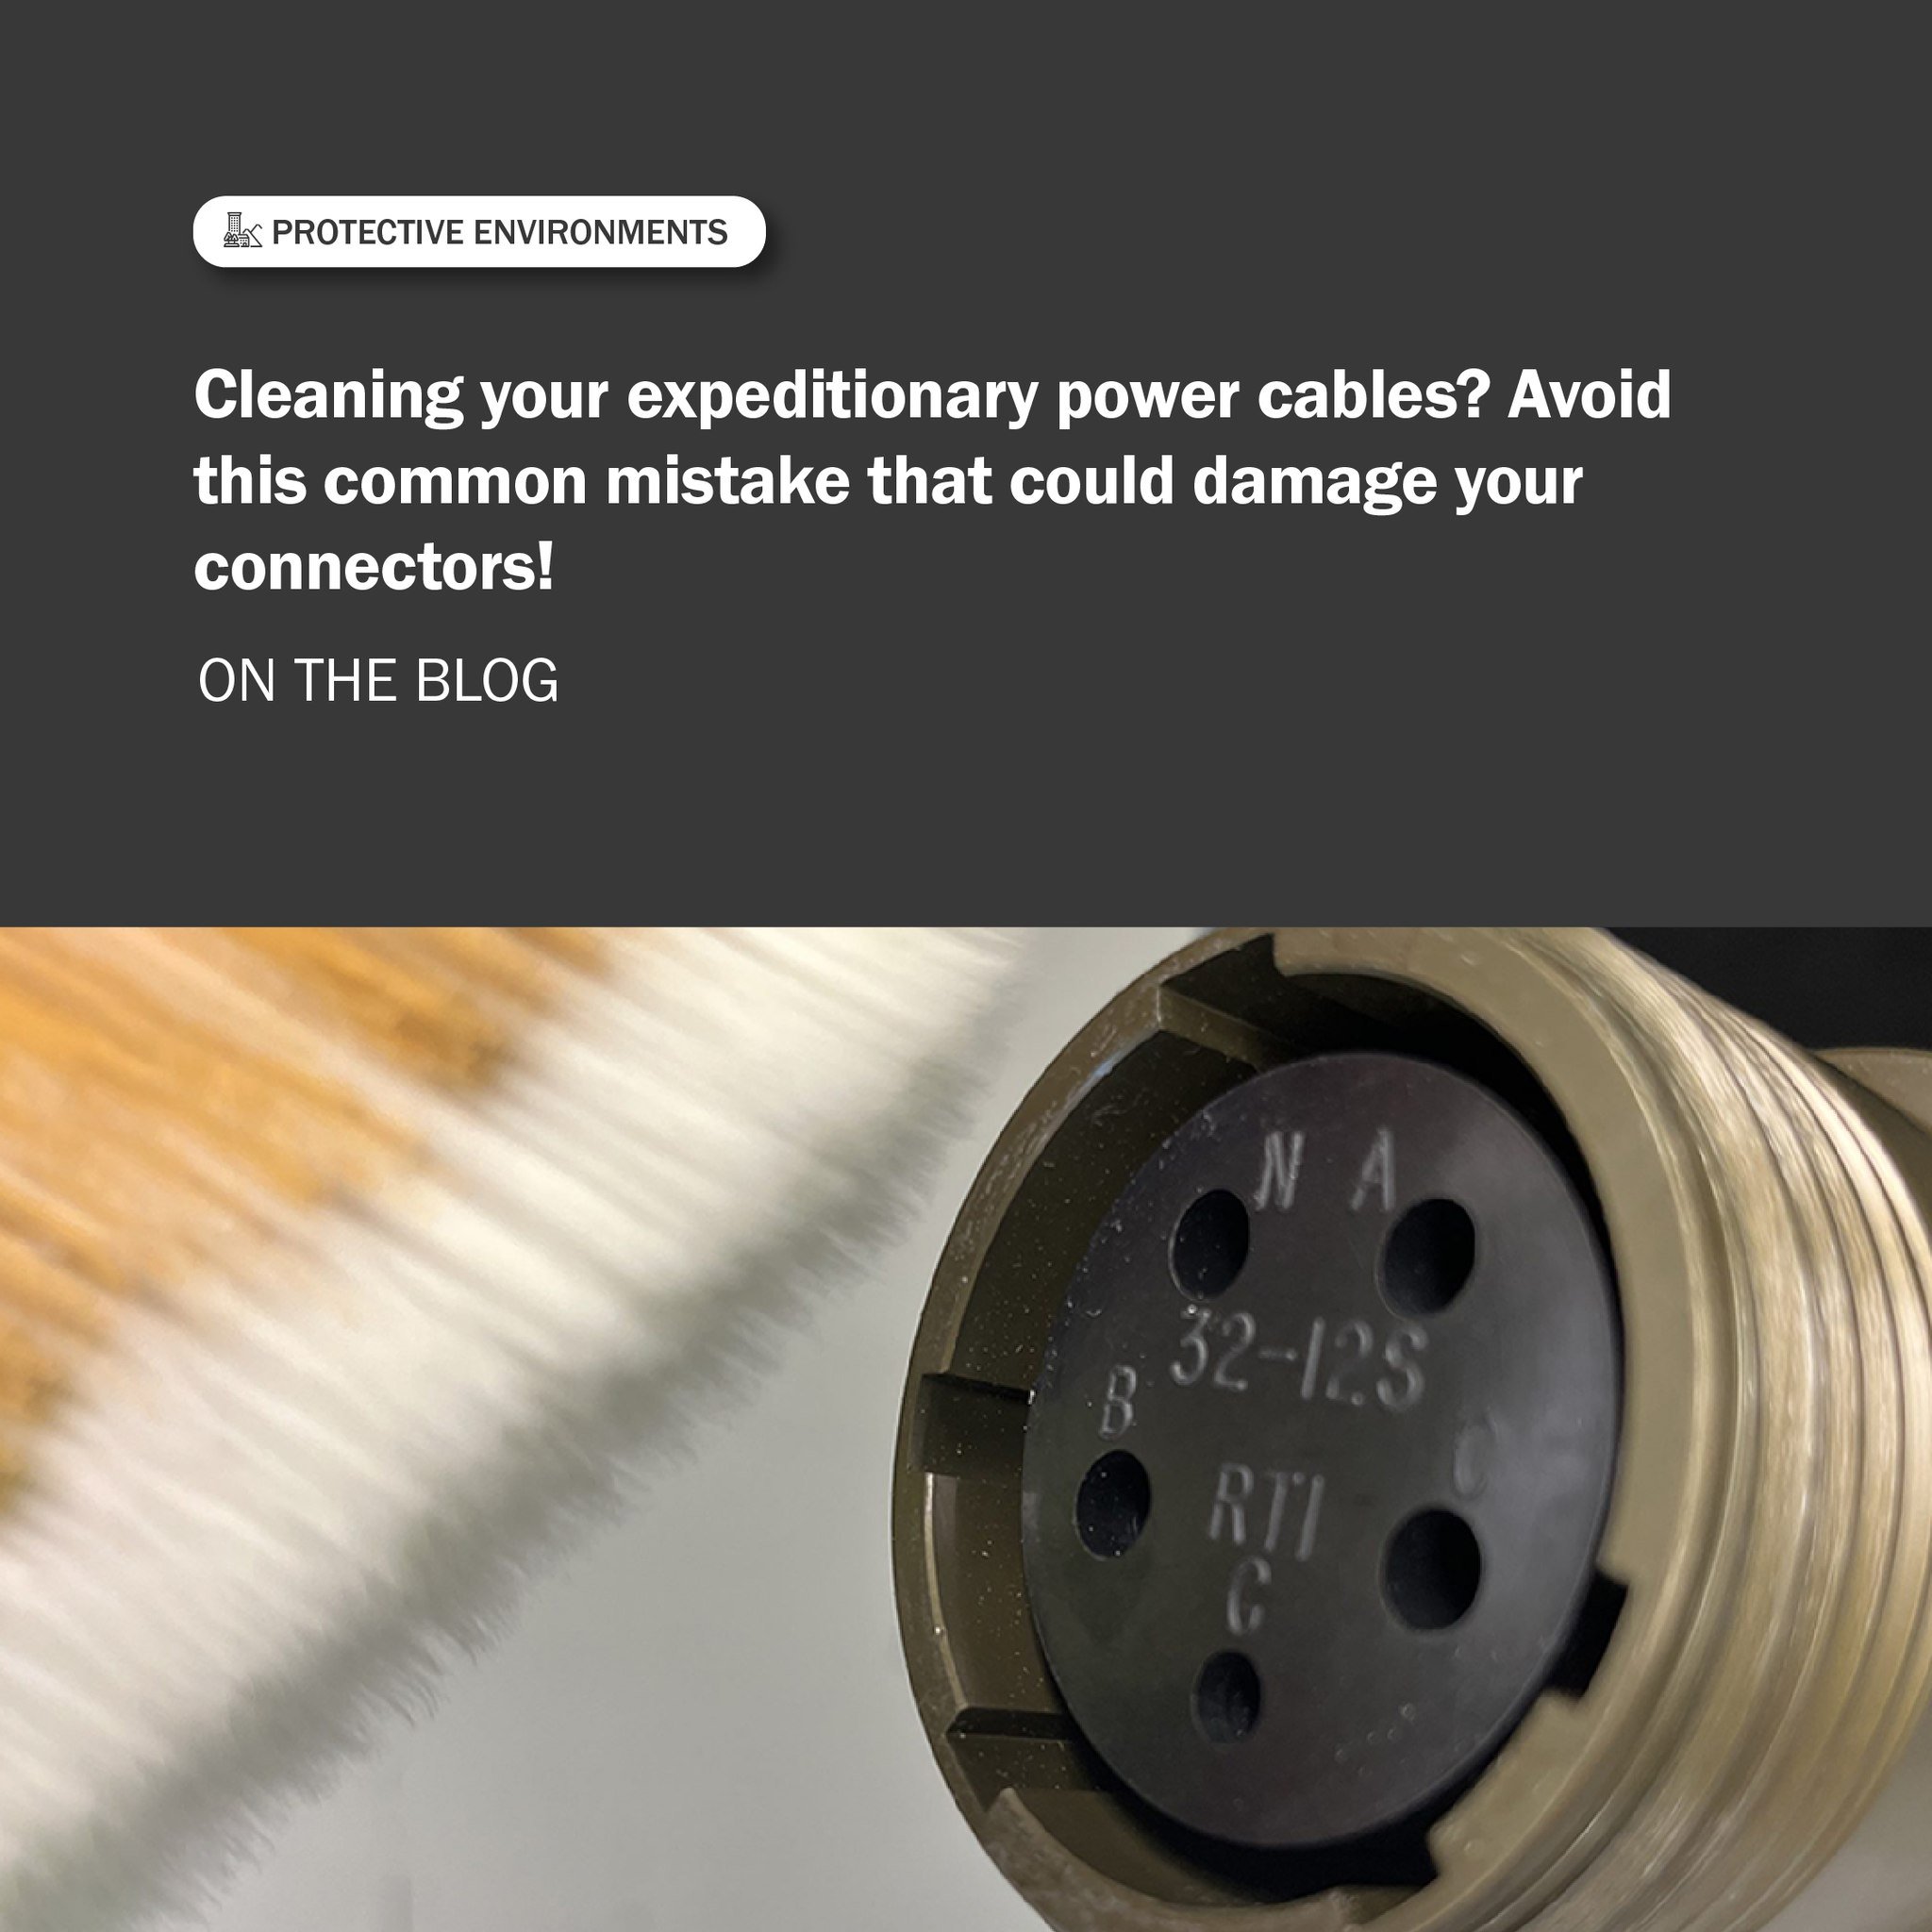 Discover the common mistakes that can damage your expeditionary cable connectors. 🔌

Our latest blog offers expert guidance on maintaining the integrity of your connections and boosting the longevity and performance of your systems. 

Don't let thes